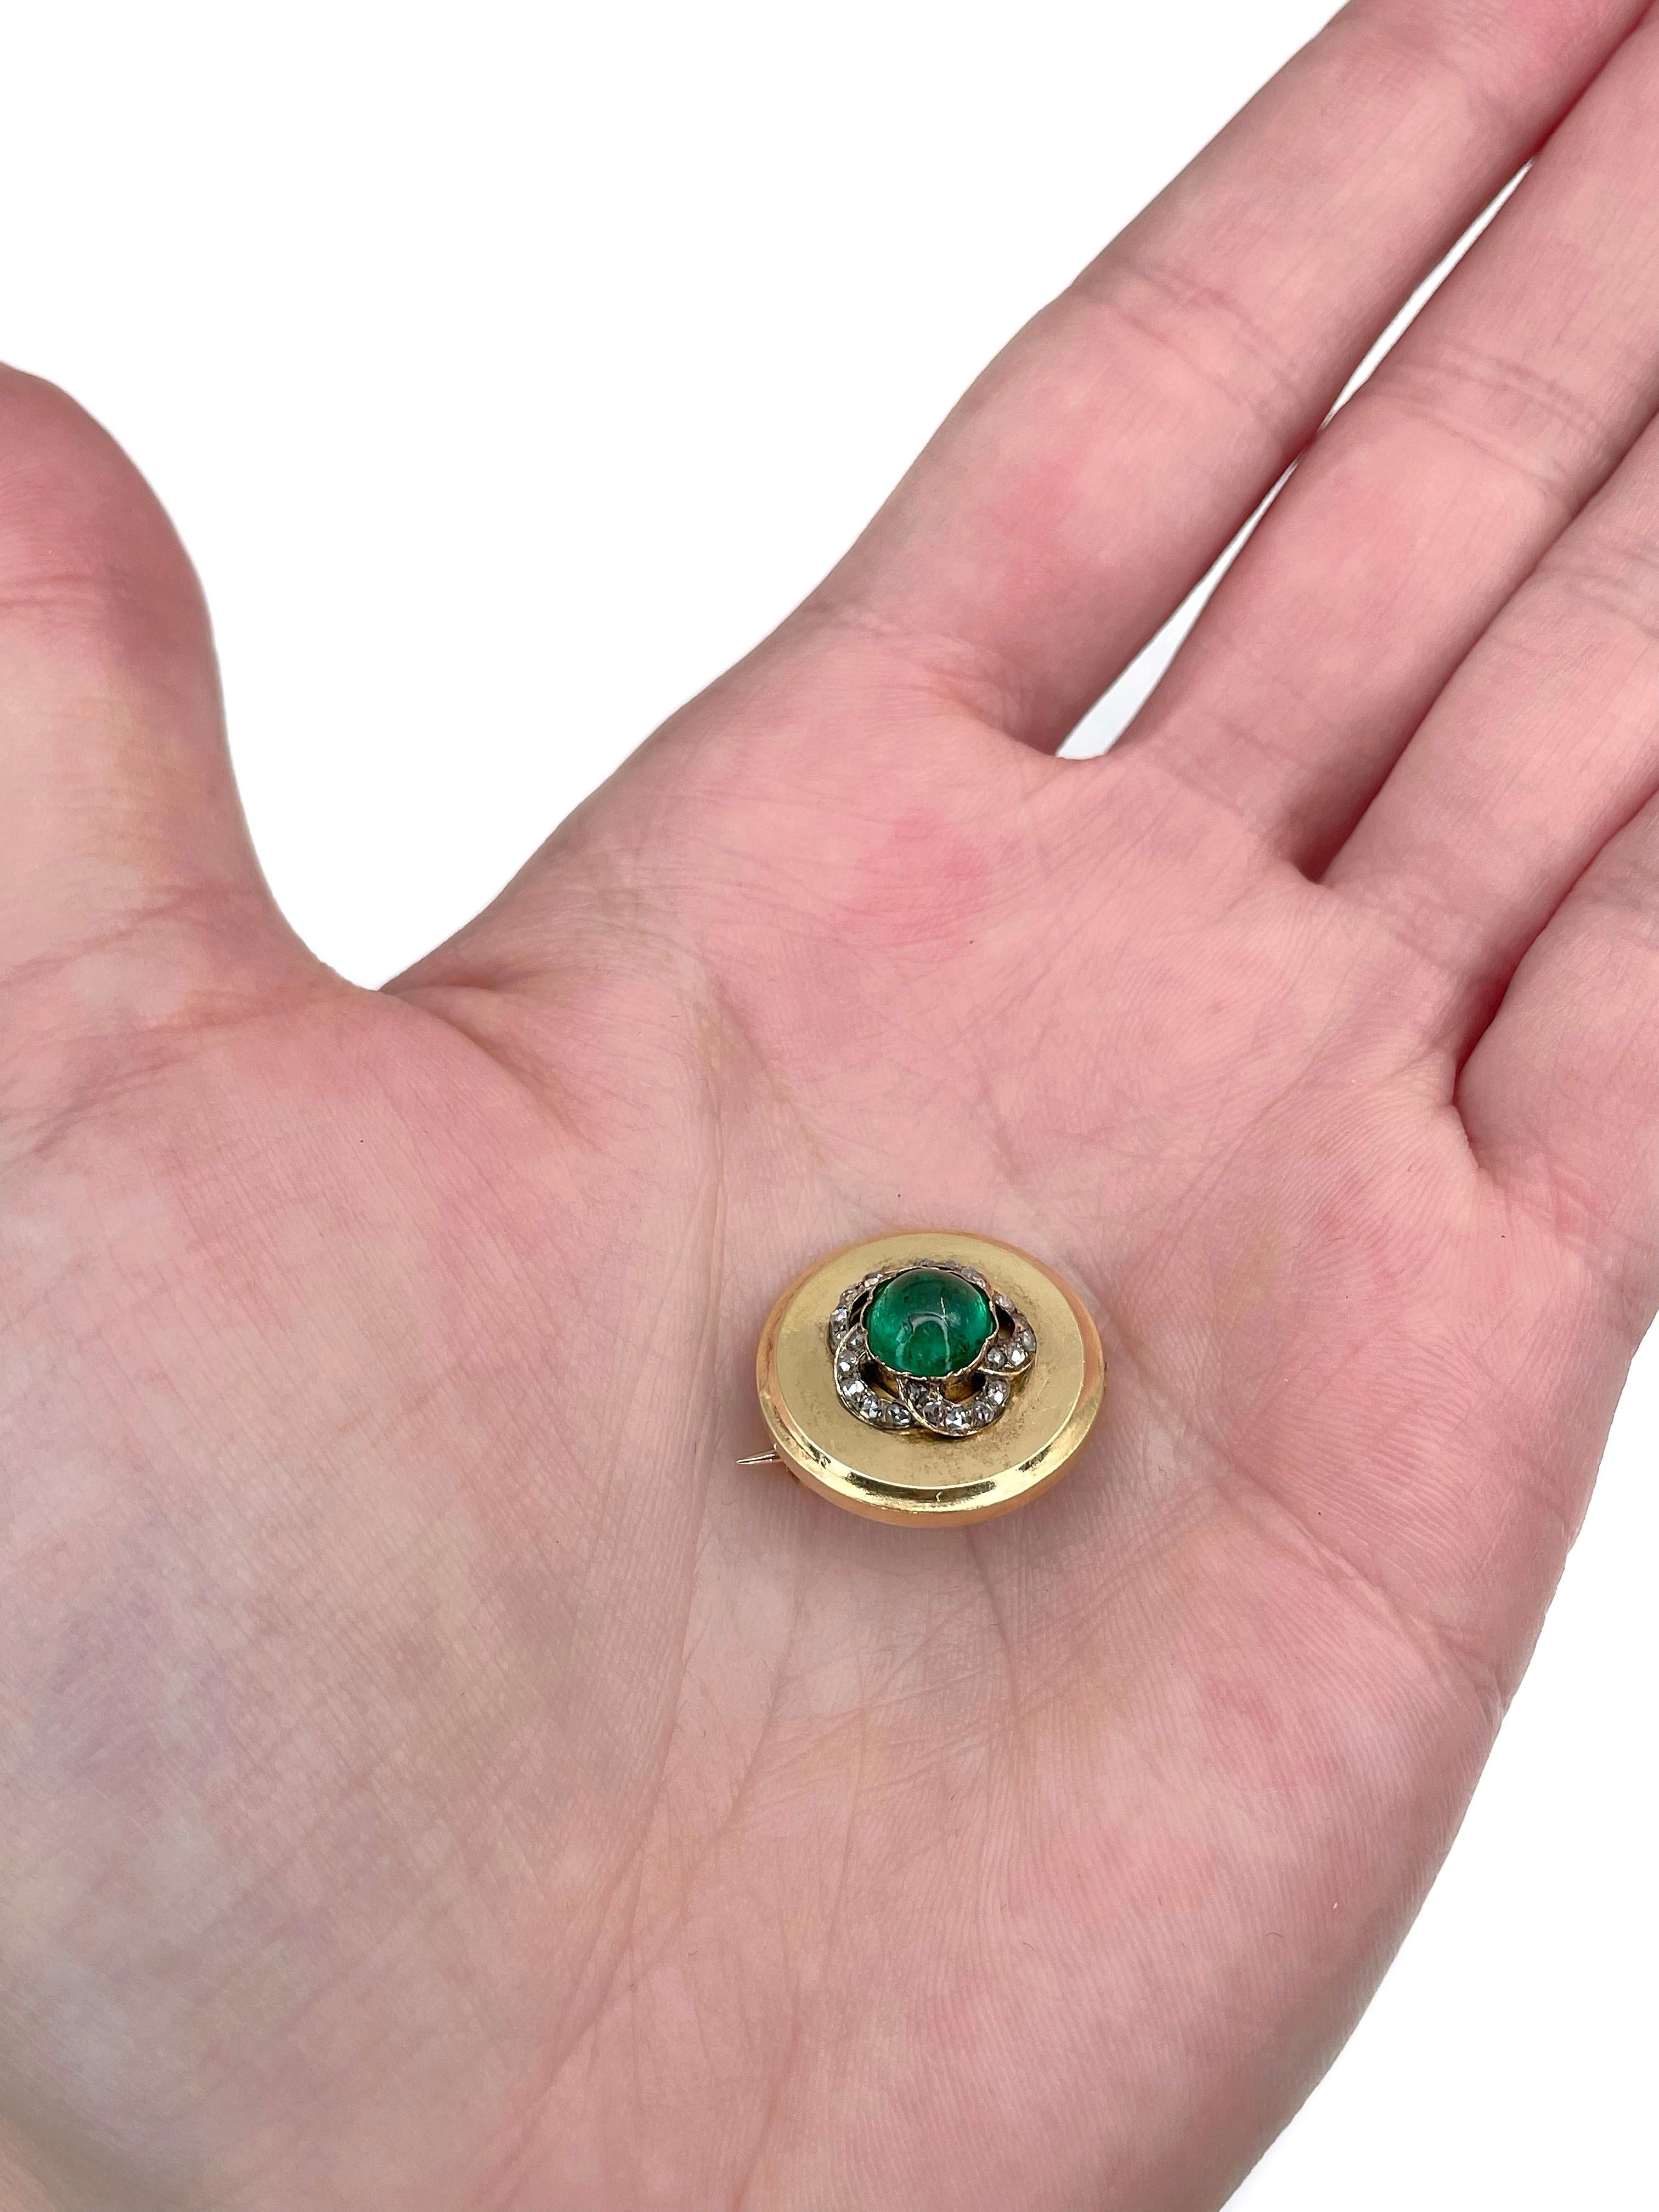 This is a lovely small Victorian round pin brooch crafted in 18K yellow gold. Circa 1890. 

The piece features cabochon cut emerald and rose cut diamonds.

Has a C clasp. 

Weight: 4.05g
Diameter: 1.9cm

———

If you have any questions, please feel